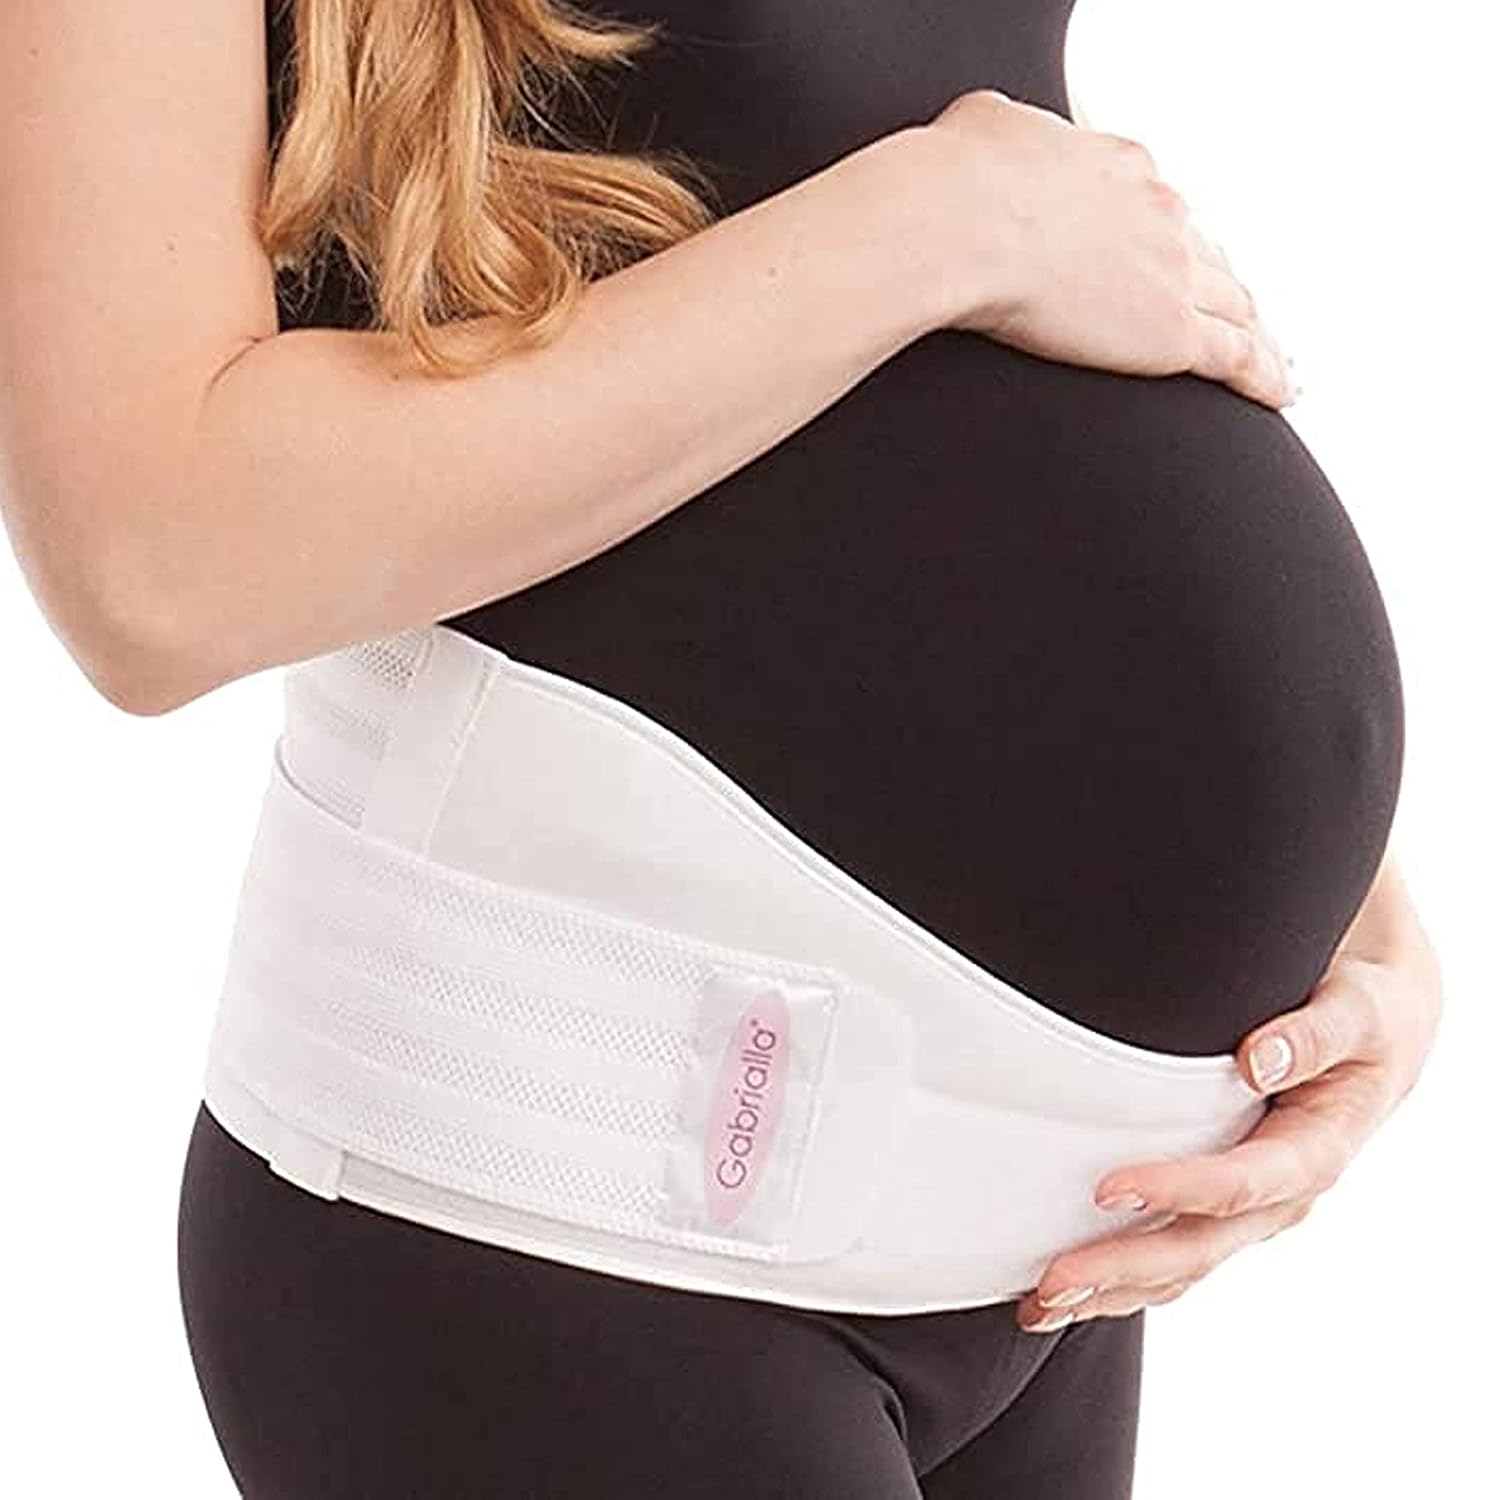 Gabrialla Deluxe Maternity Support Belt (Medium-strength): MS-96(i) - White - Large